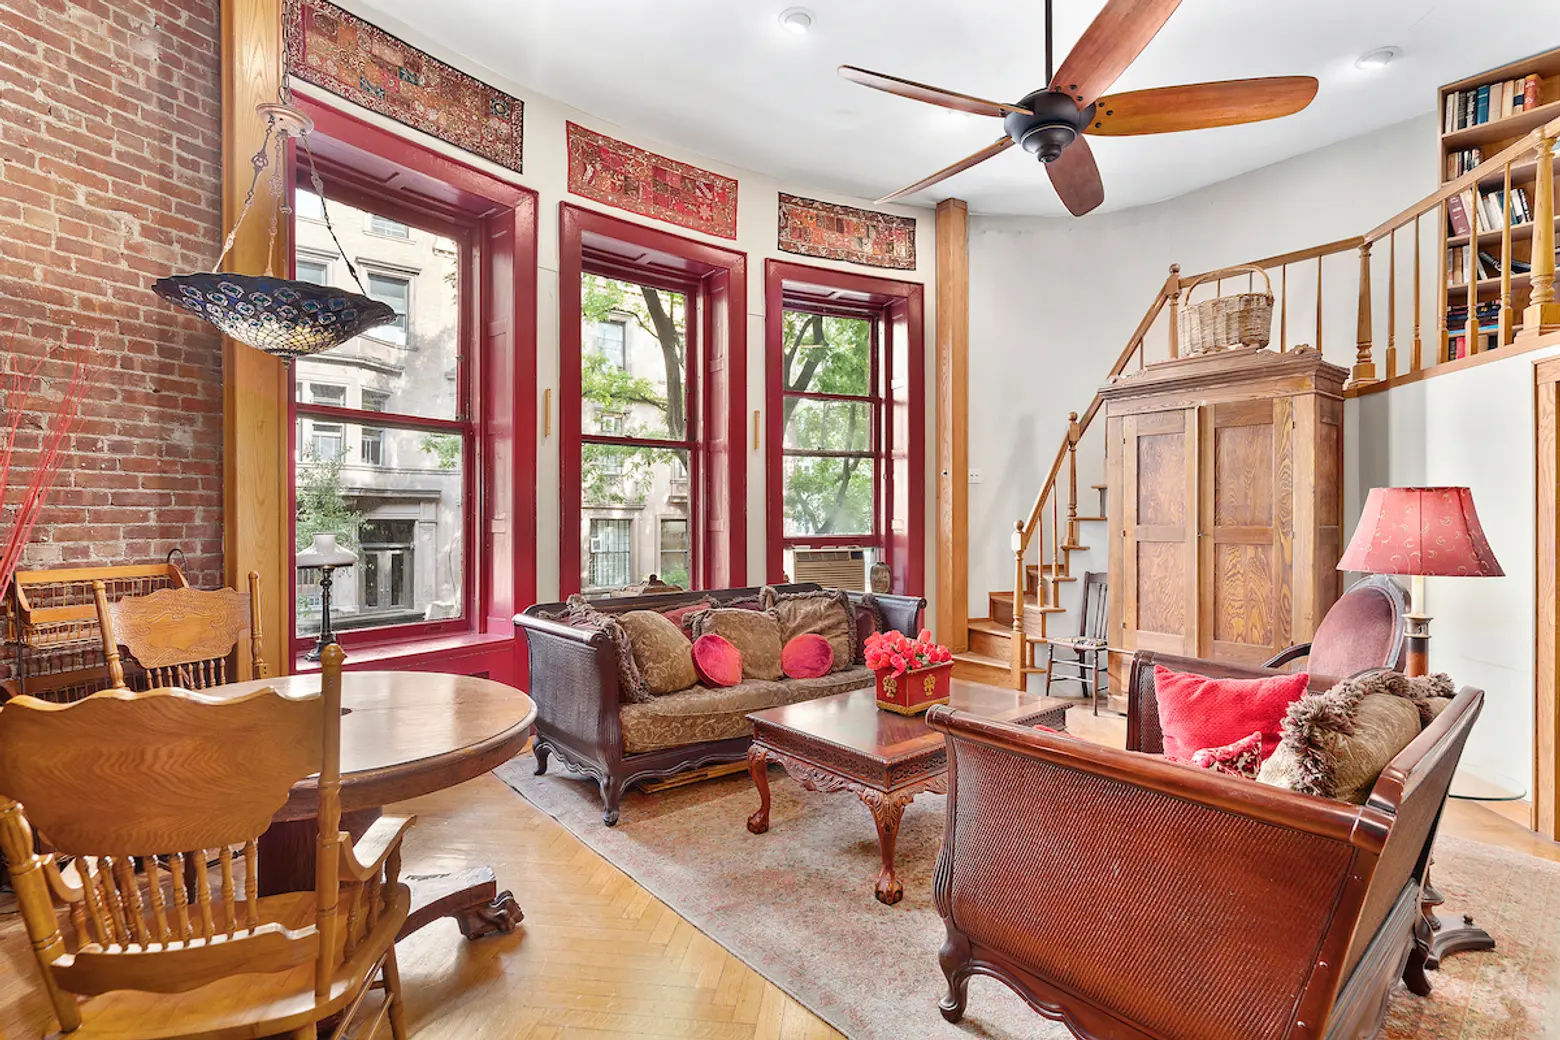 Townhouse? Loft? This $599K co-op off Central Park West has elements of both